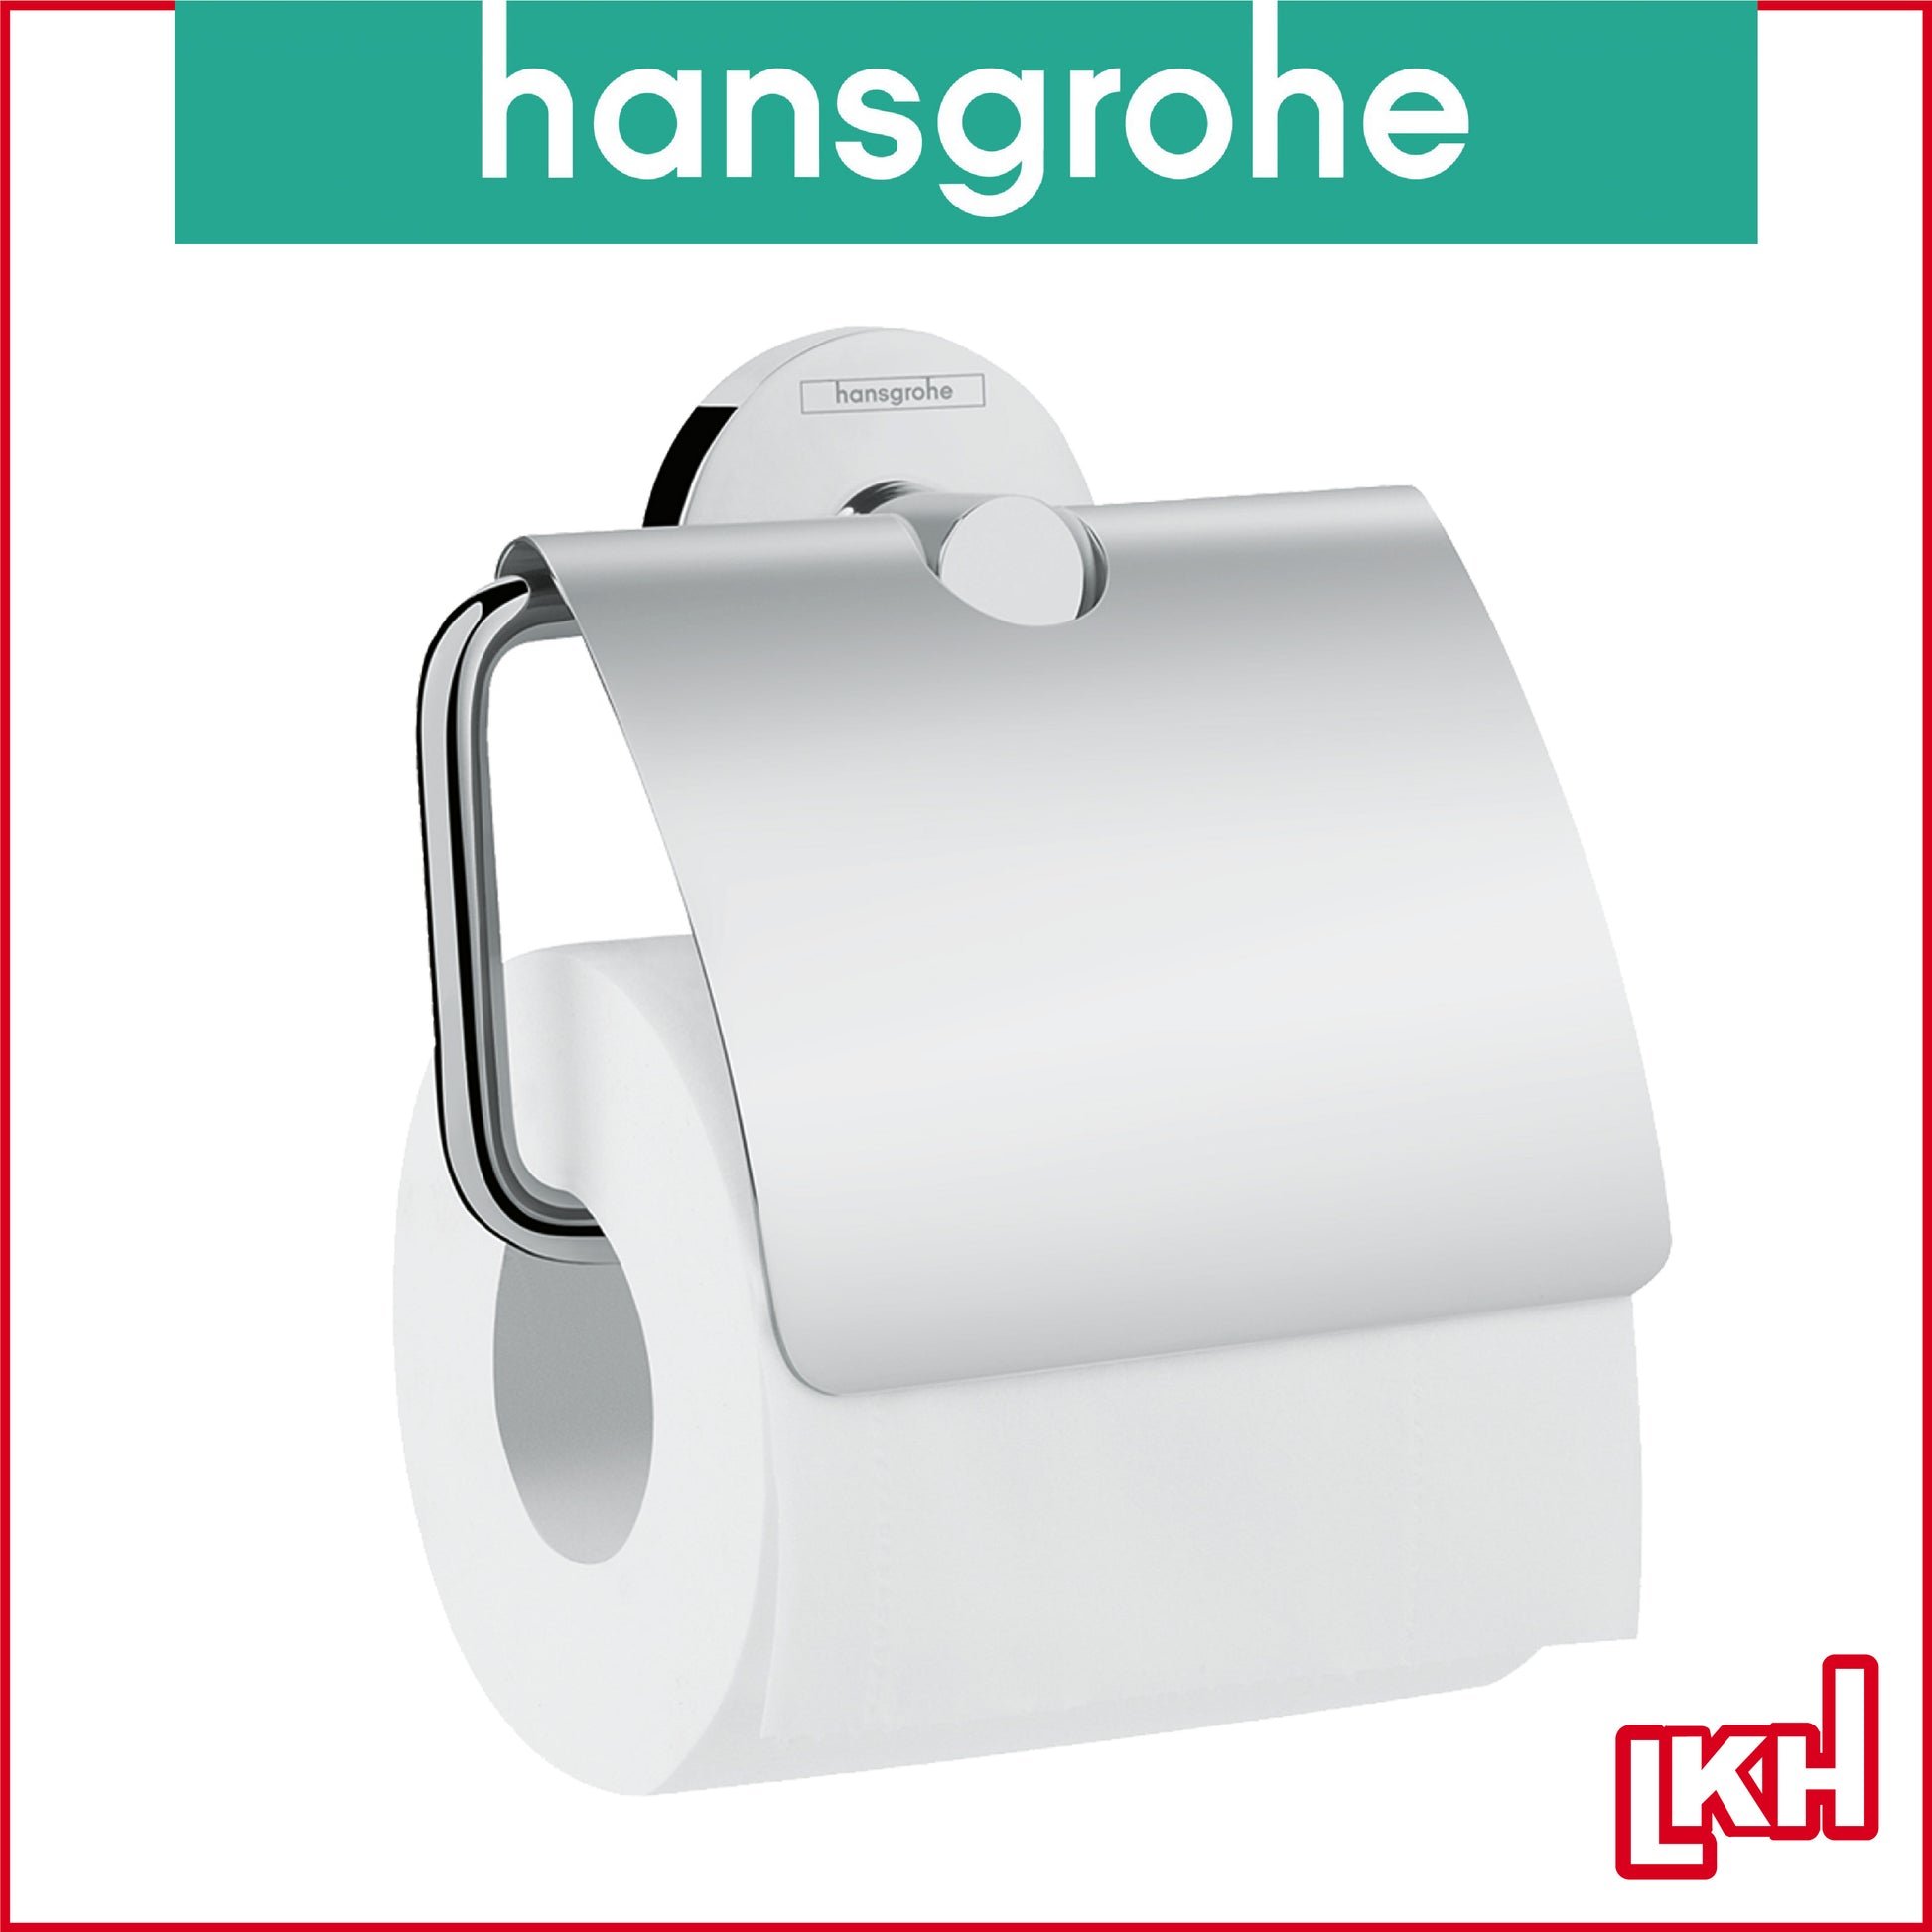 hansgrohe 41723000 toilet roll holder with cover